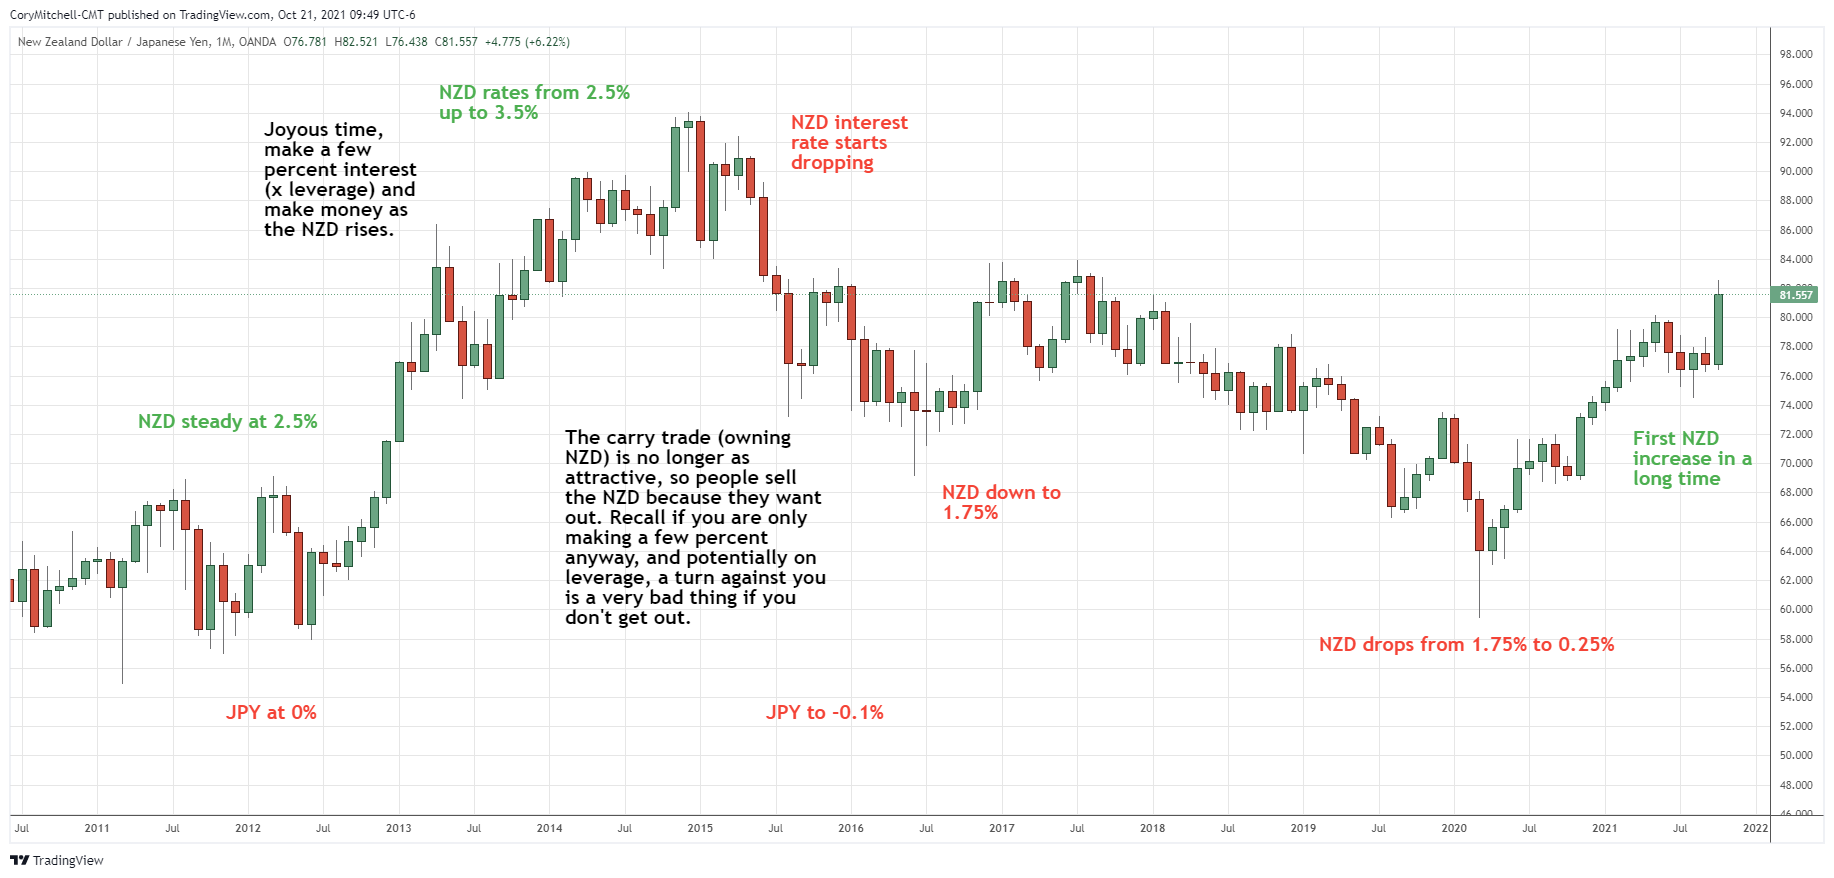 NZDJPY carry trade example with details of interest rates 